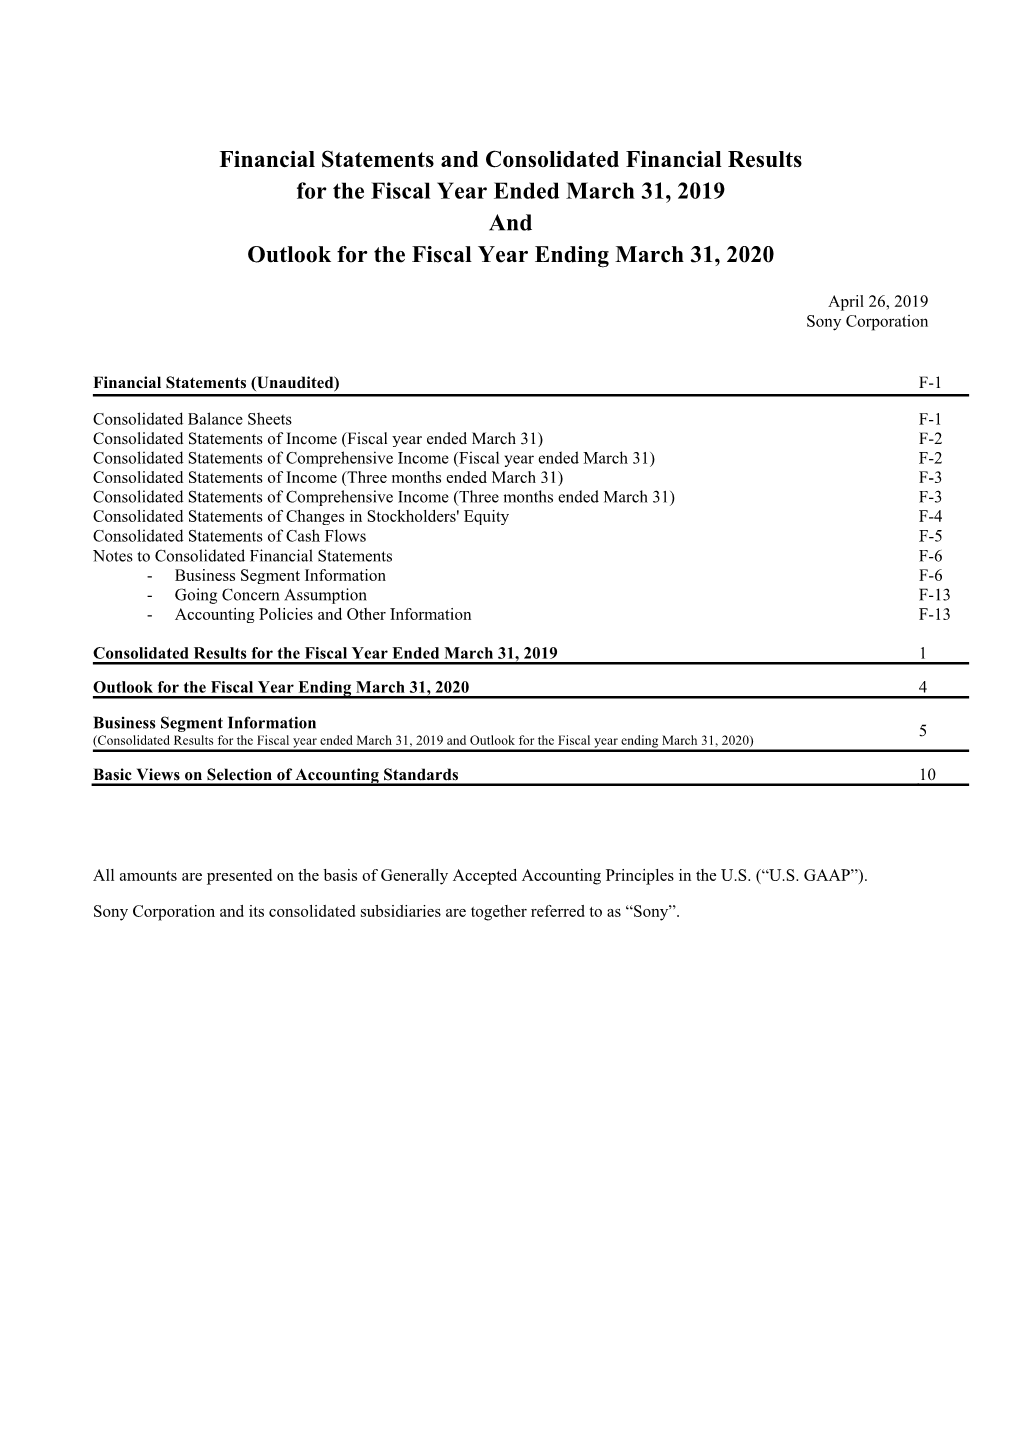 Consolidated Financial Results for the Fiscal Year Ended March 31, 2019 and Outlook for the Fiscal Year Ending March 31, 2020